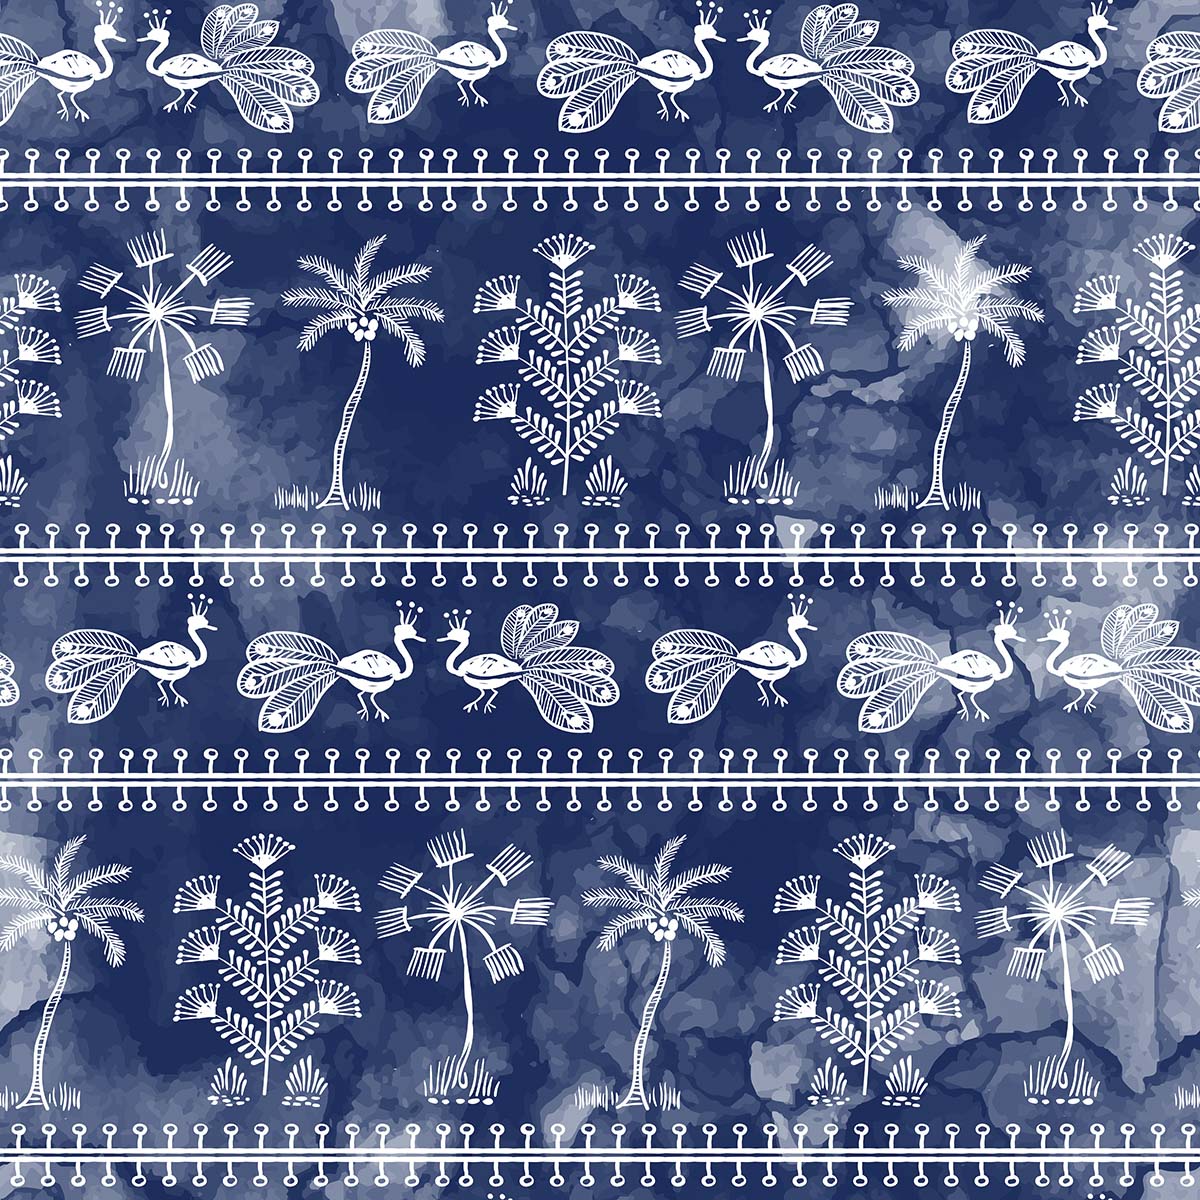 A blue and white pattern with birds and trees